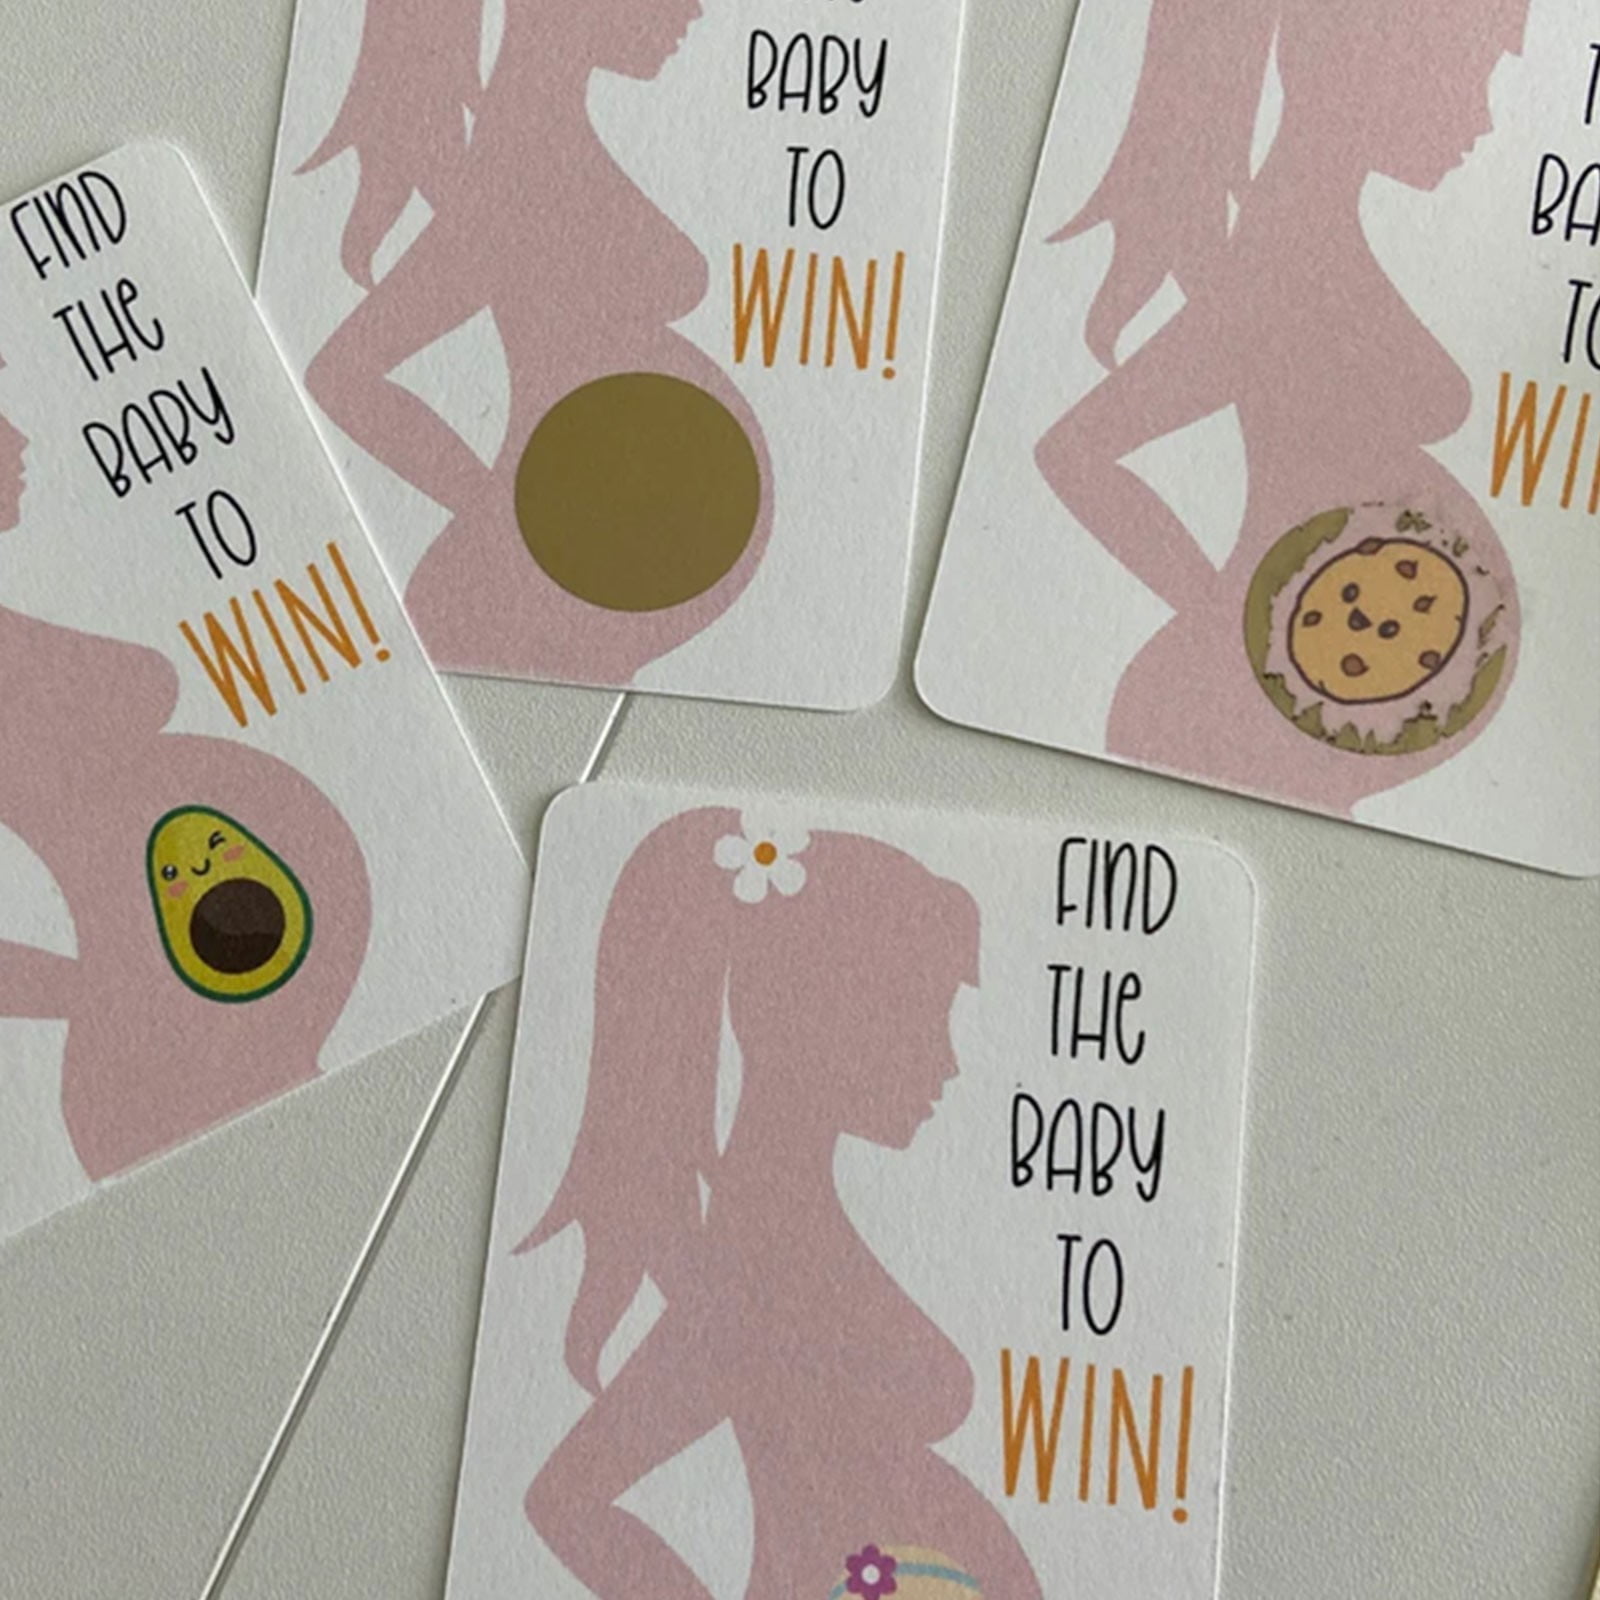 How to make scratch-off magic paper – YMCA of Greater Toronto Blog